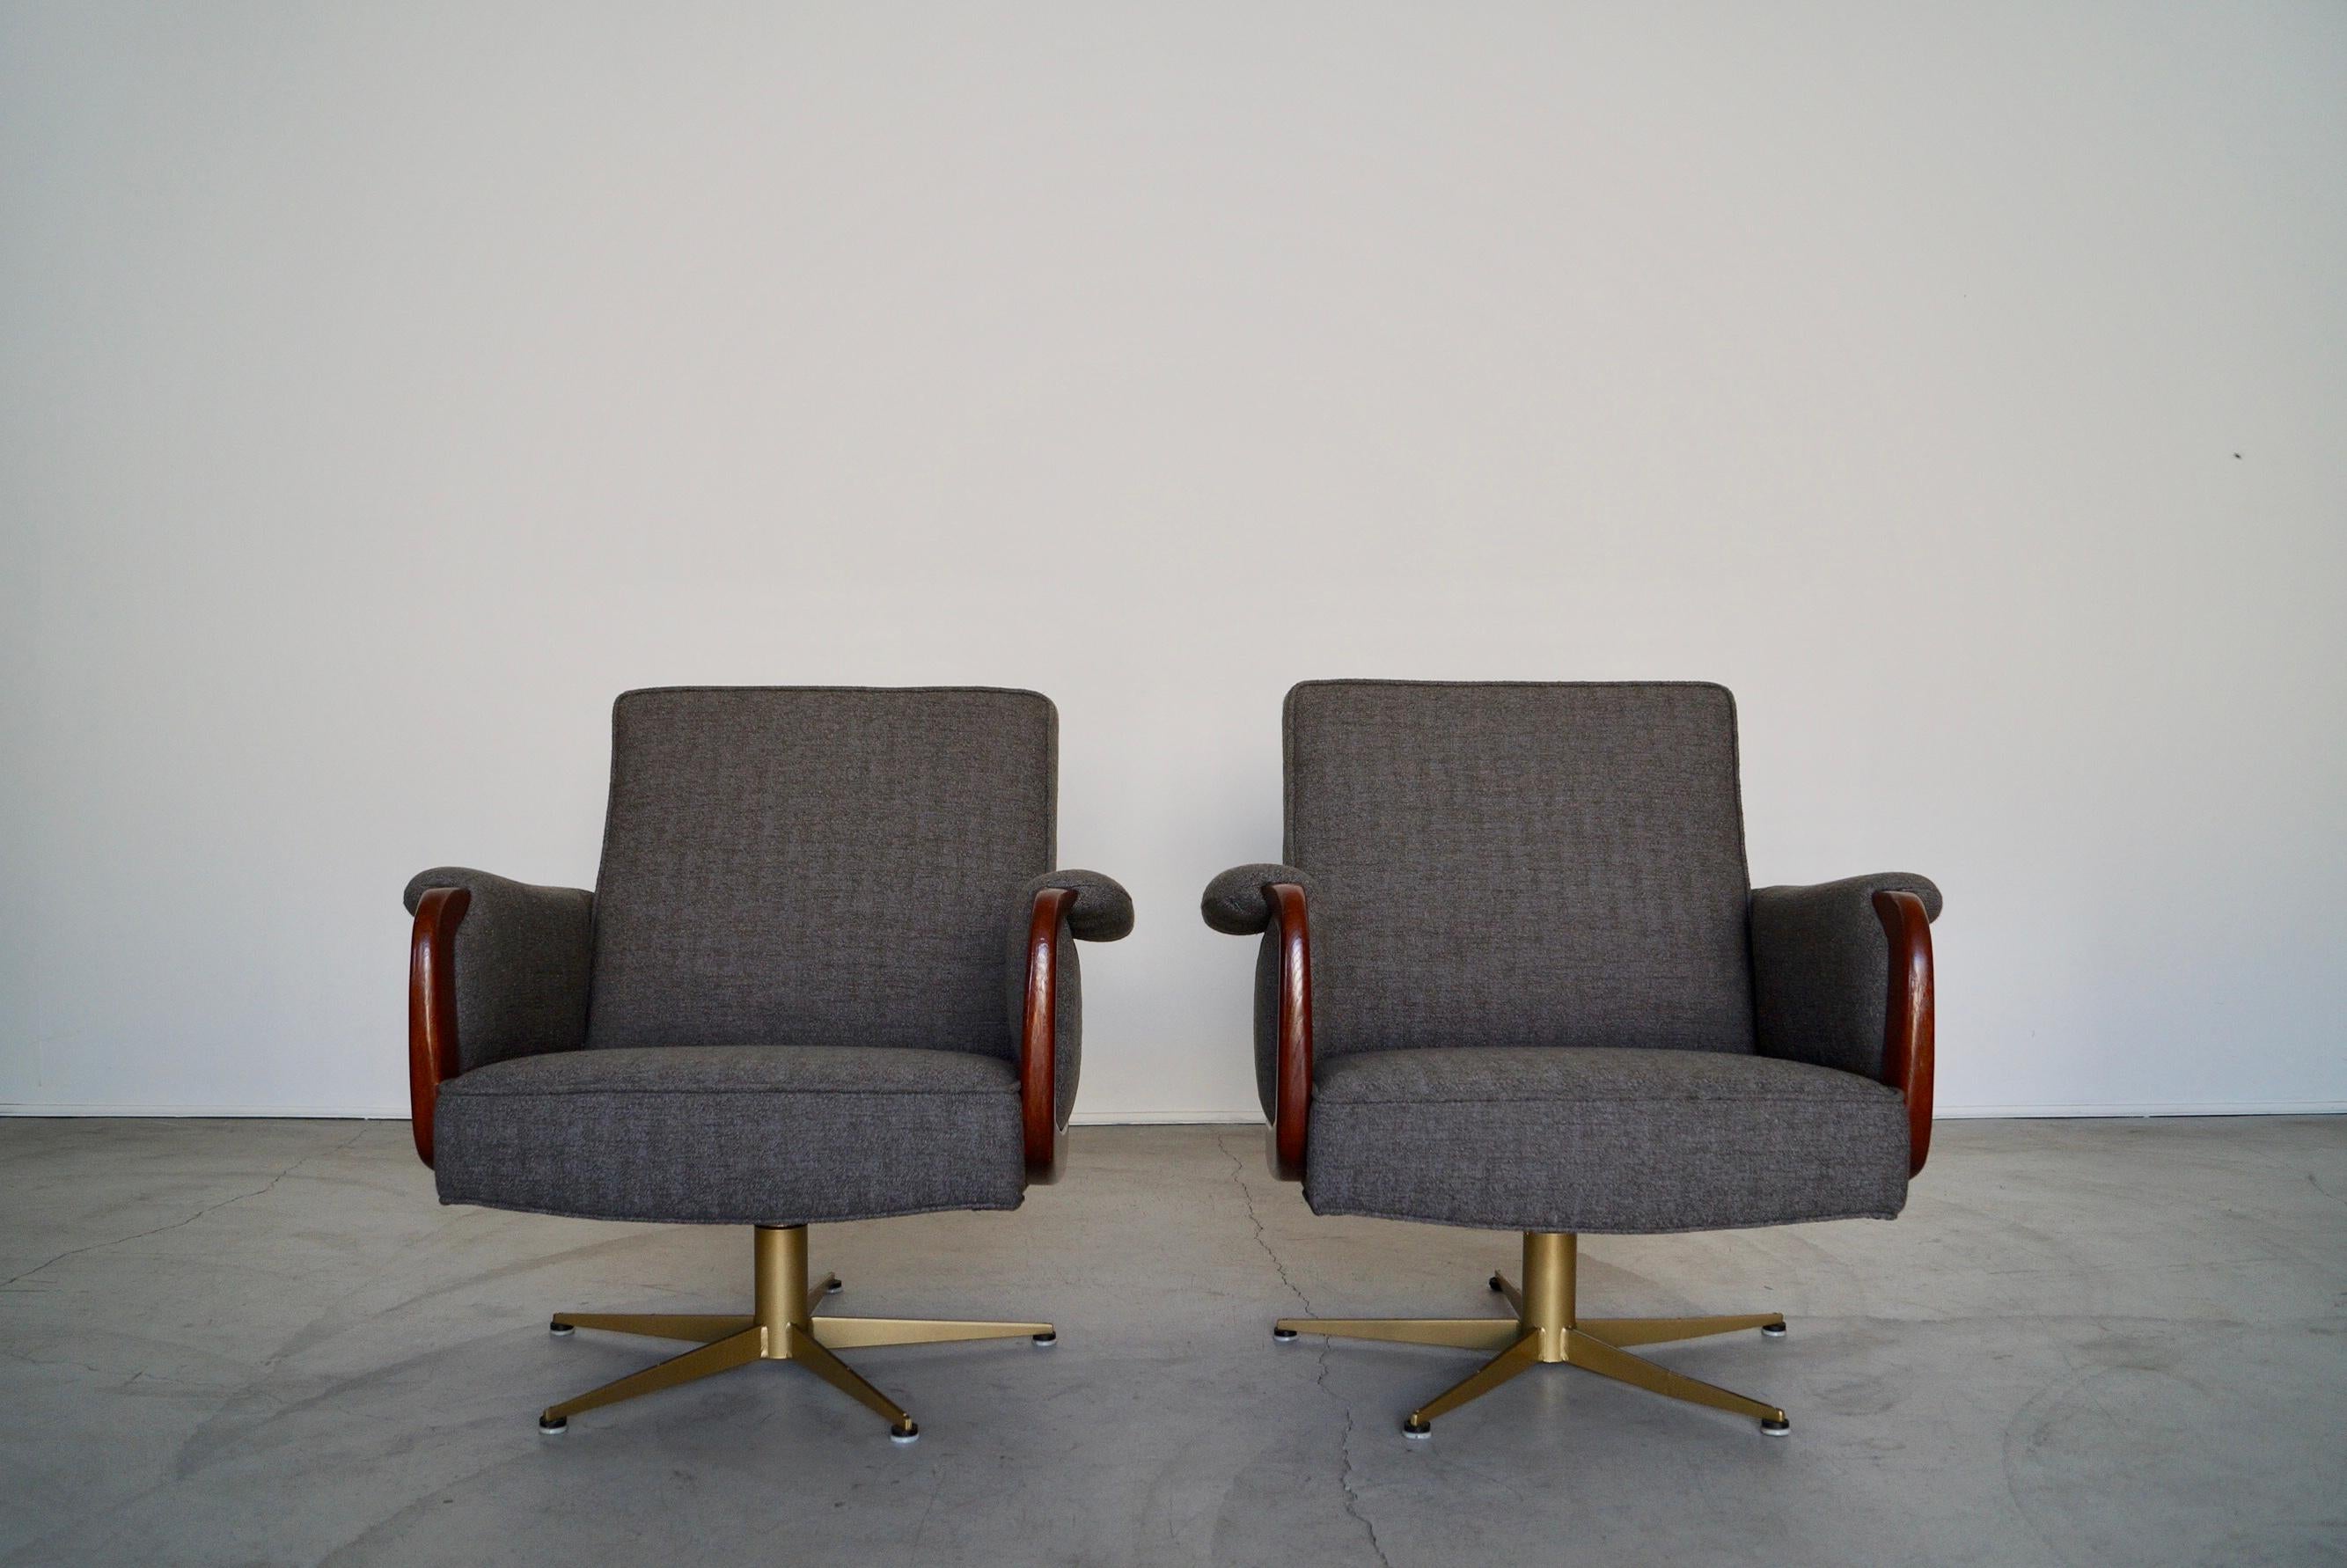 Mid-century Modern lounge chairs for sale. They have been completely restored, and look incredible once again. They have a star atomic base that has been professionally sandblasted and powder coated in a gold brass finish. They have a wood trim on